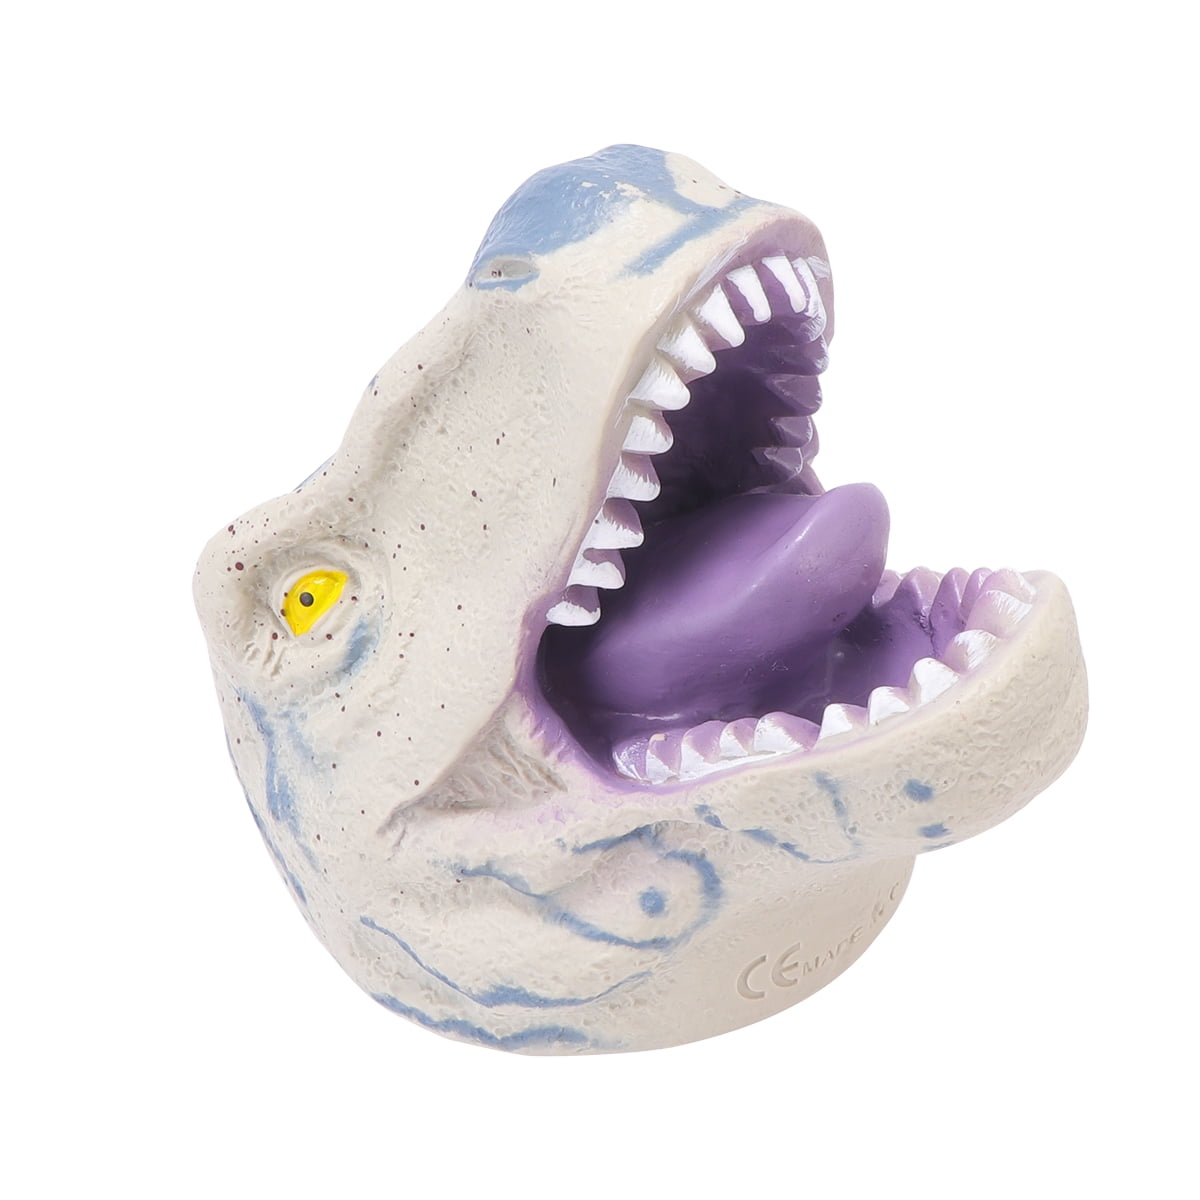 Kids puppet toys with life-like human teeth : r/oddlyterrifying